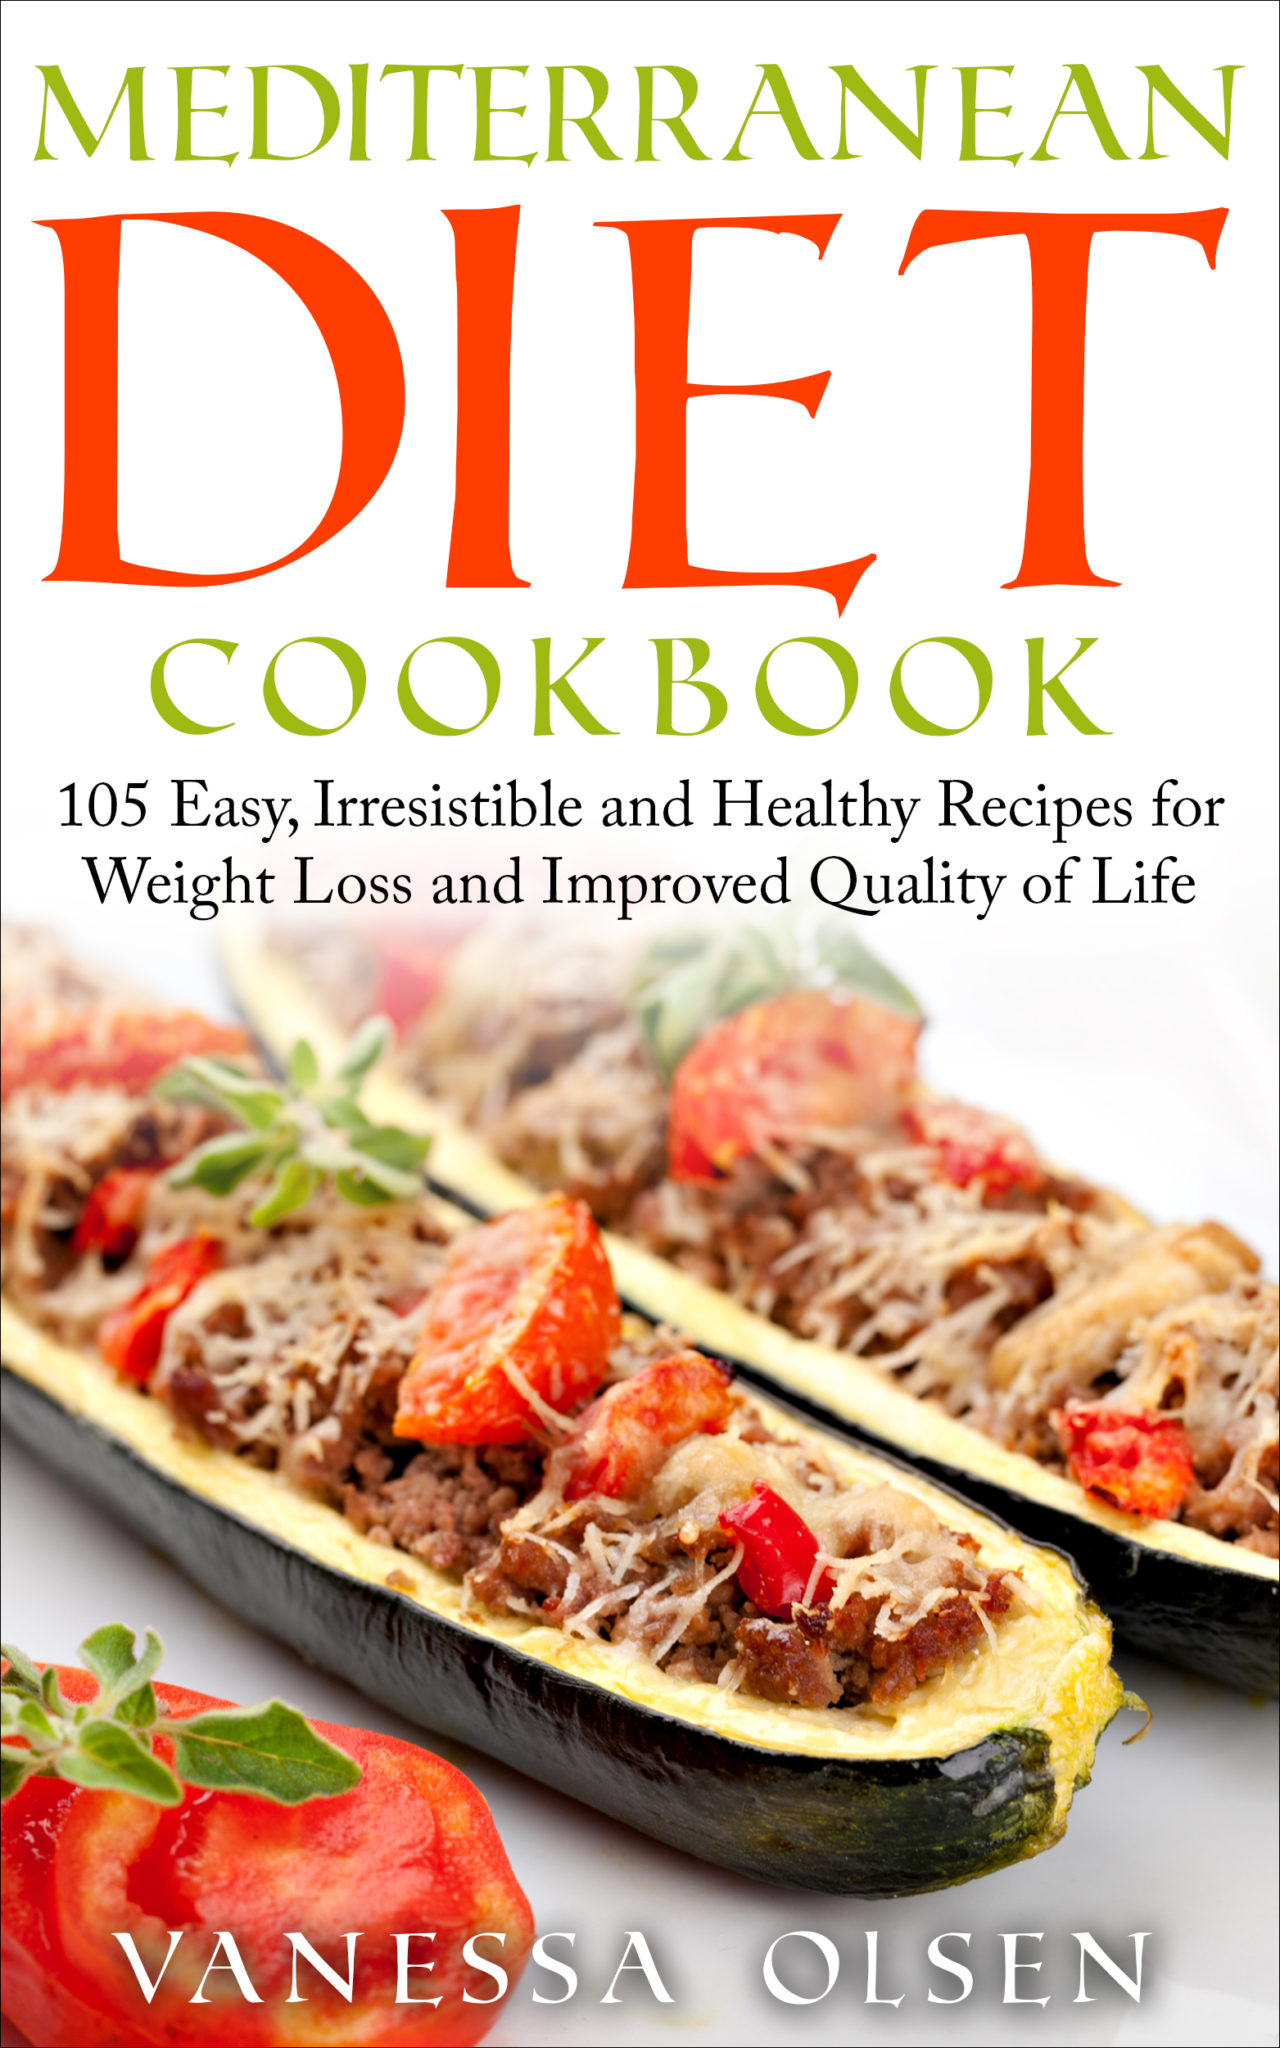 FREE: Mediterranean Diet Cookbook – 105 Easy, Irresistable, and Healthy Recipes for Weight Loss and Improved Quality of Life While Minimizing the Risk of Disease by Vanessa Olsen